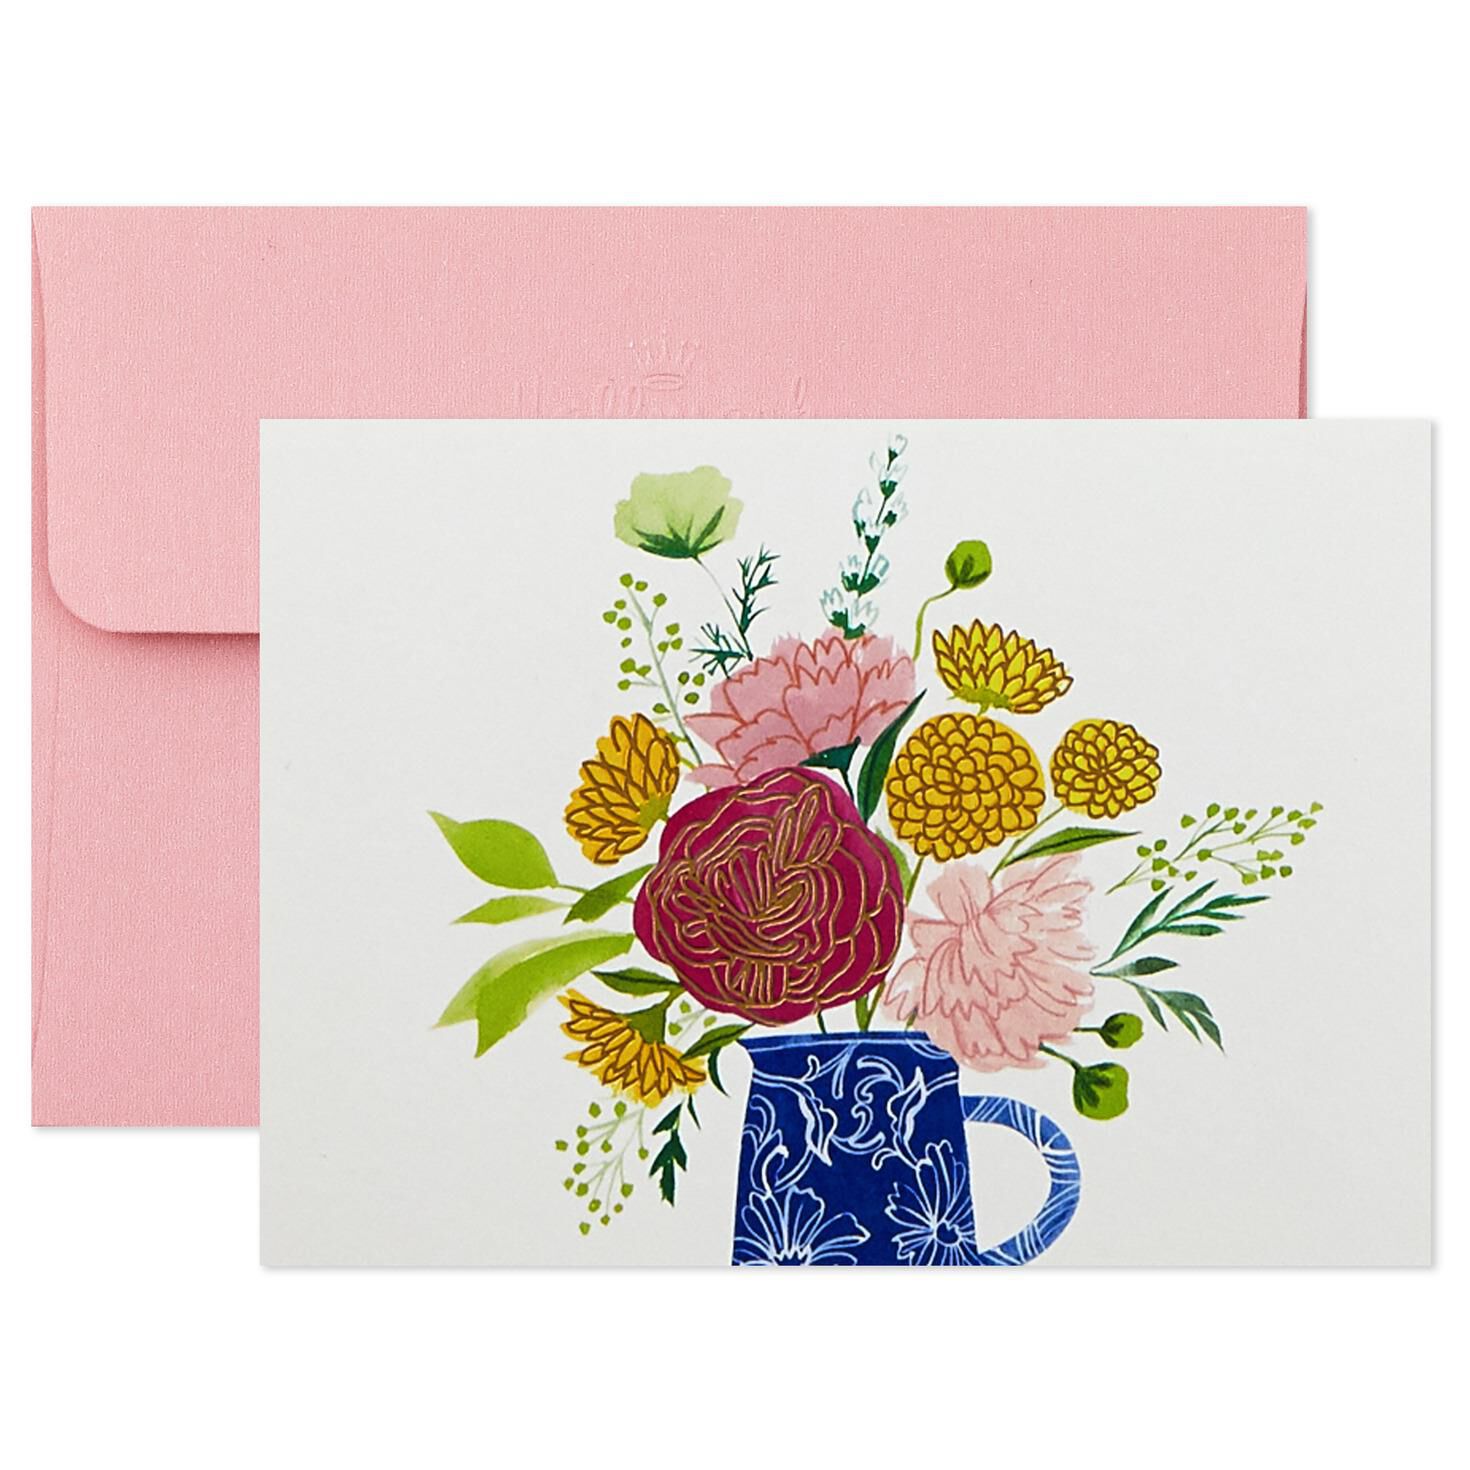 Whimsical Designs Assorted Note Cards With Caddy, Box of 30 for only USD 14.99 | Hallmark